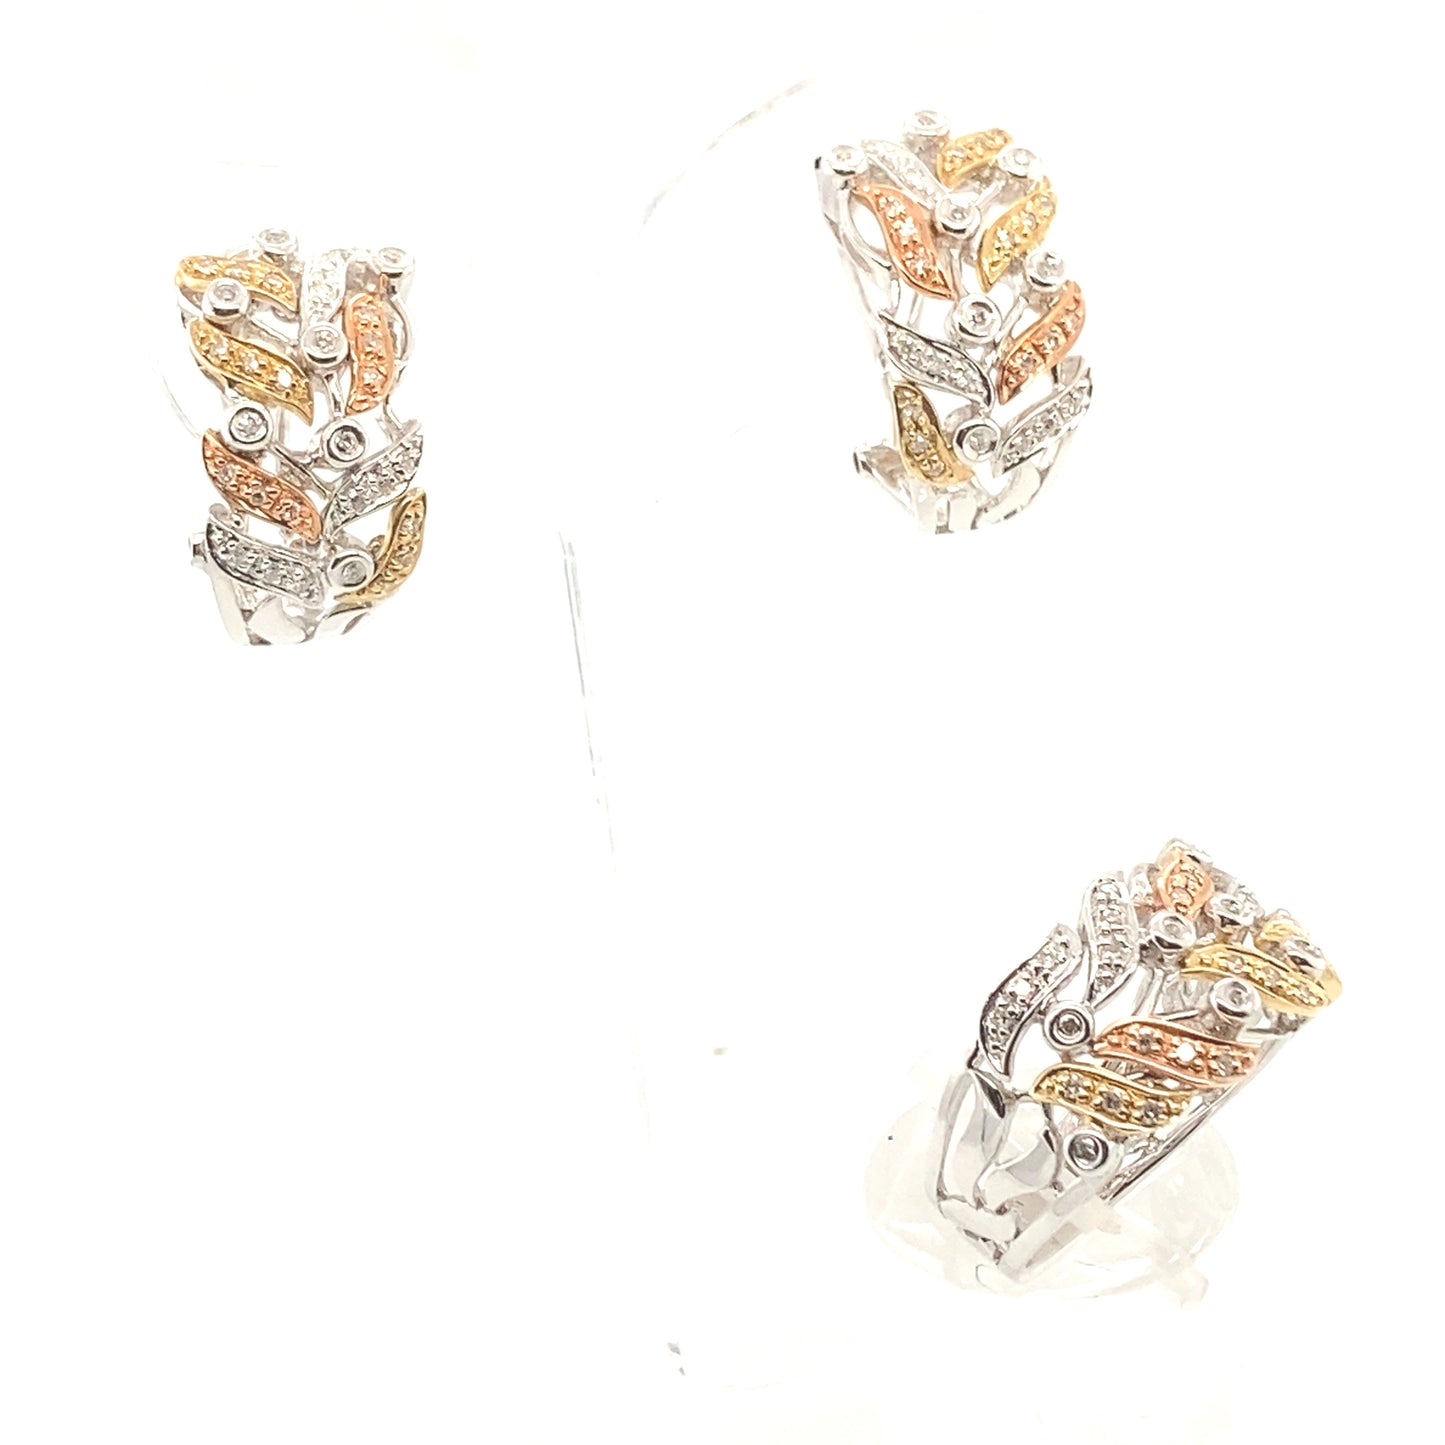 14K 3 tone /white, yellow and Roze gold /earring and ring set with diamonds.